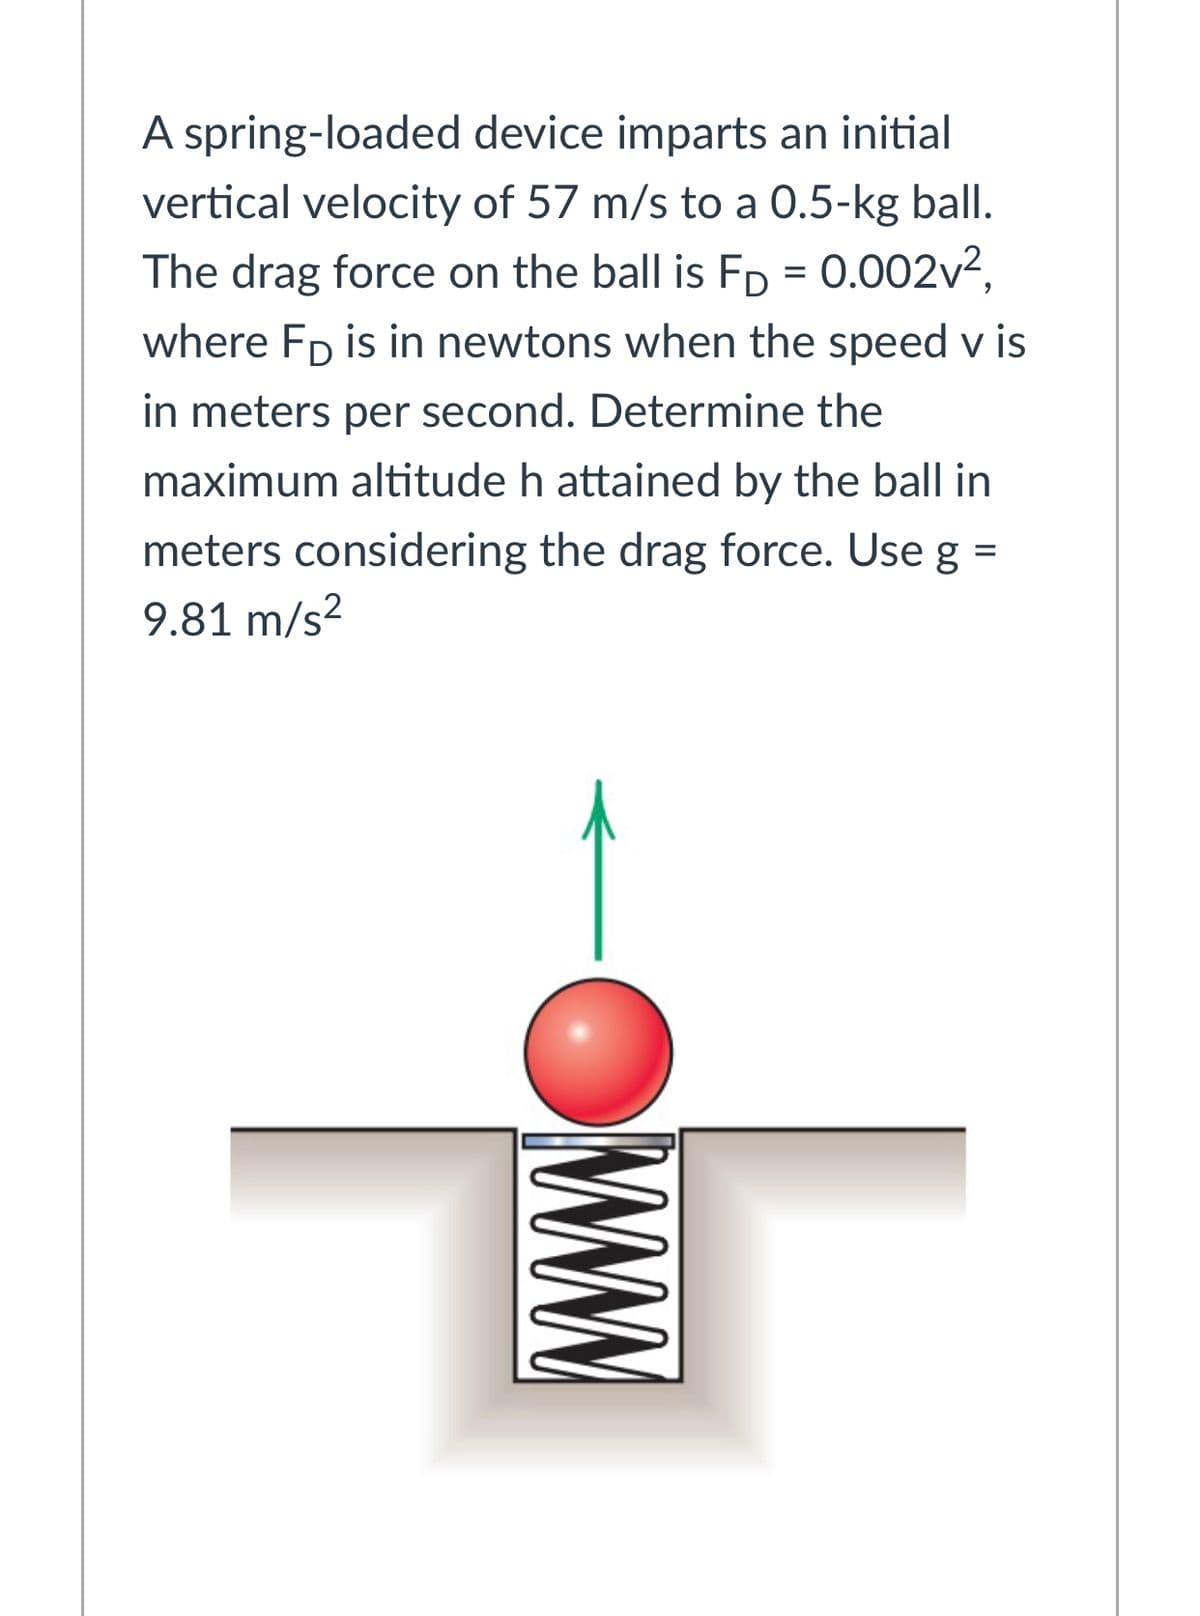 A spring-loaded device imparts an initial
vertical velocity of 57 m/s to a 0.5-kg ball.
The drag force on the ball is FD = 0.002v2,
where Fp is in newtons when the speed v is
in meters per second. Determine the
maximum altitude h attained by the ball in
meters considering the drag force. Use g =
9.81 m/s?
